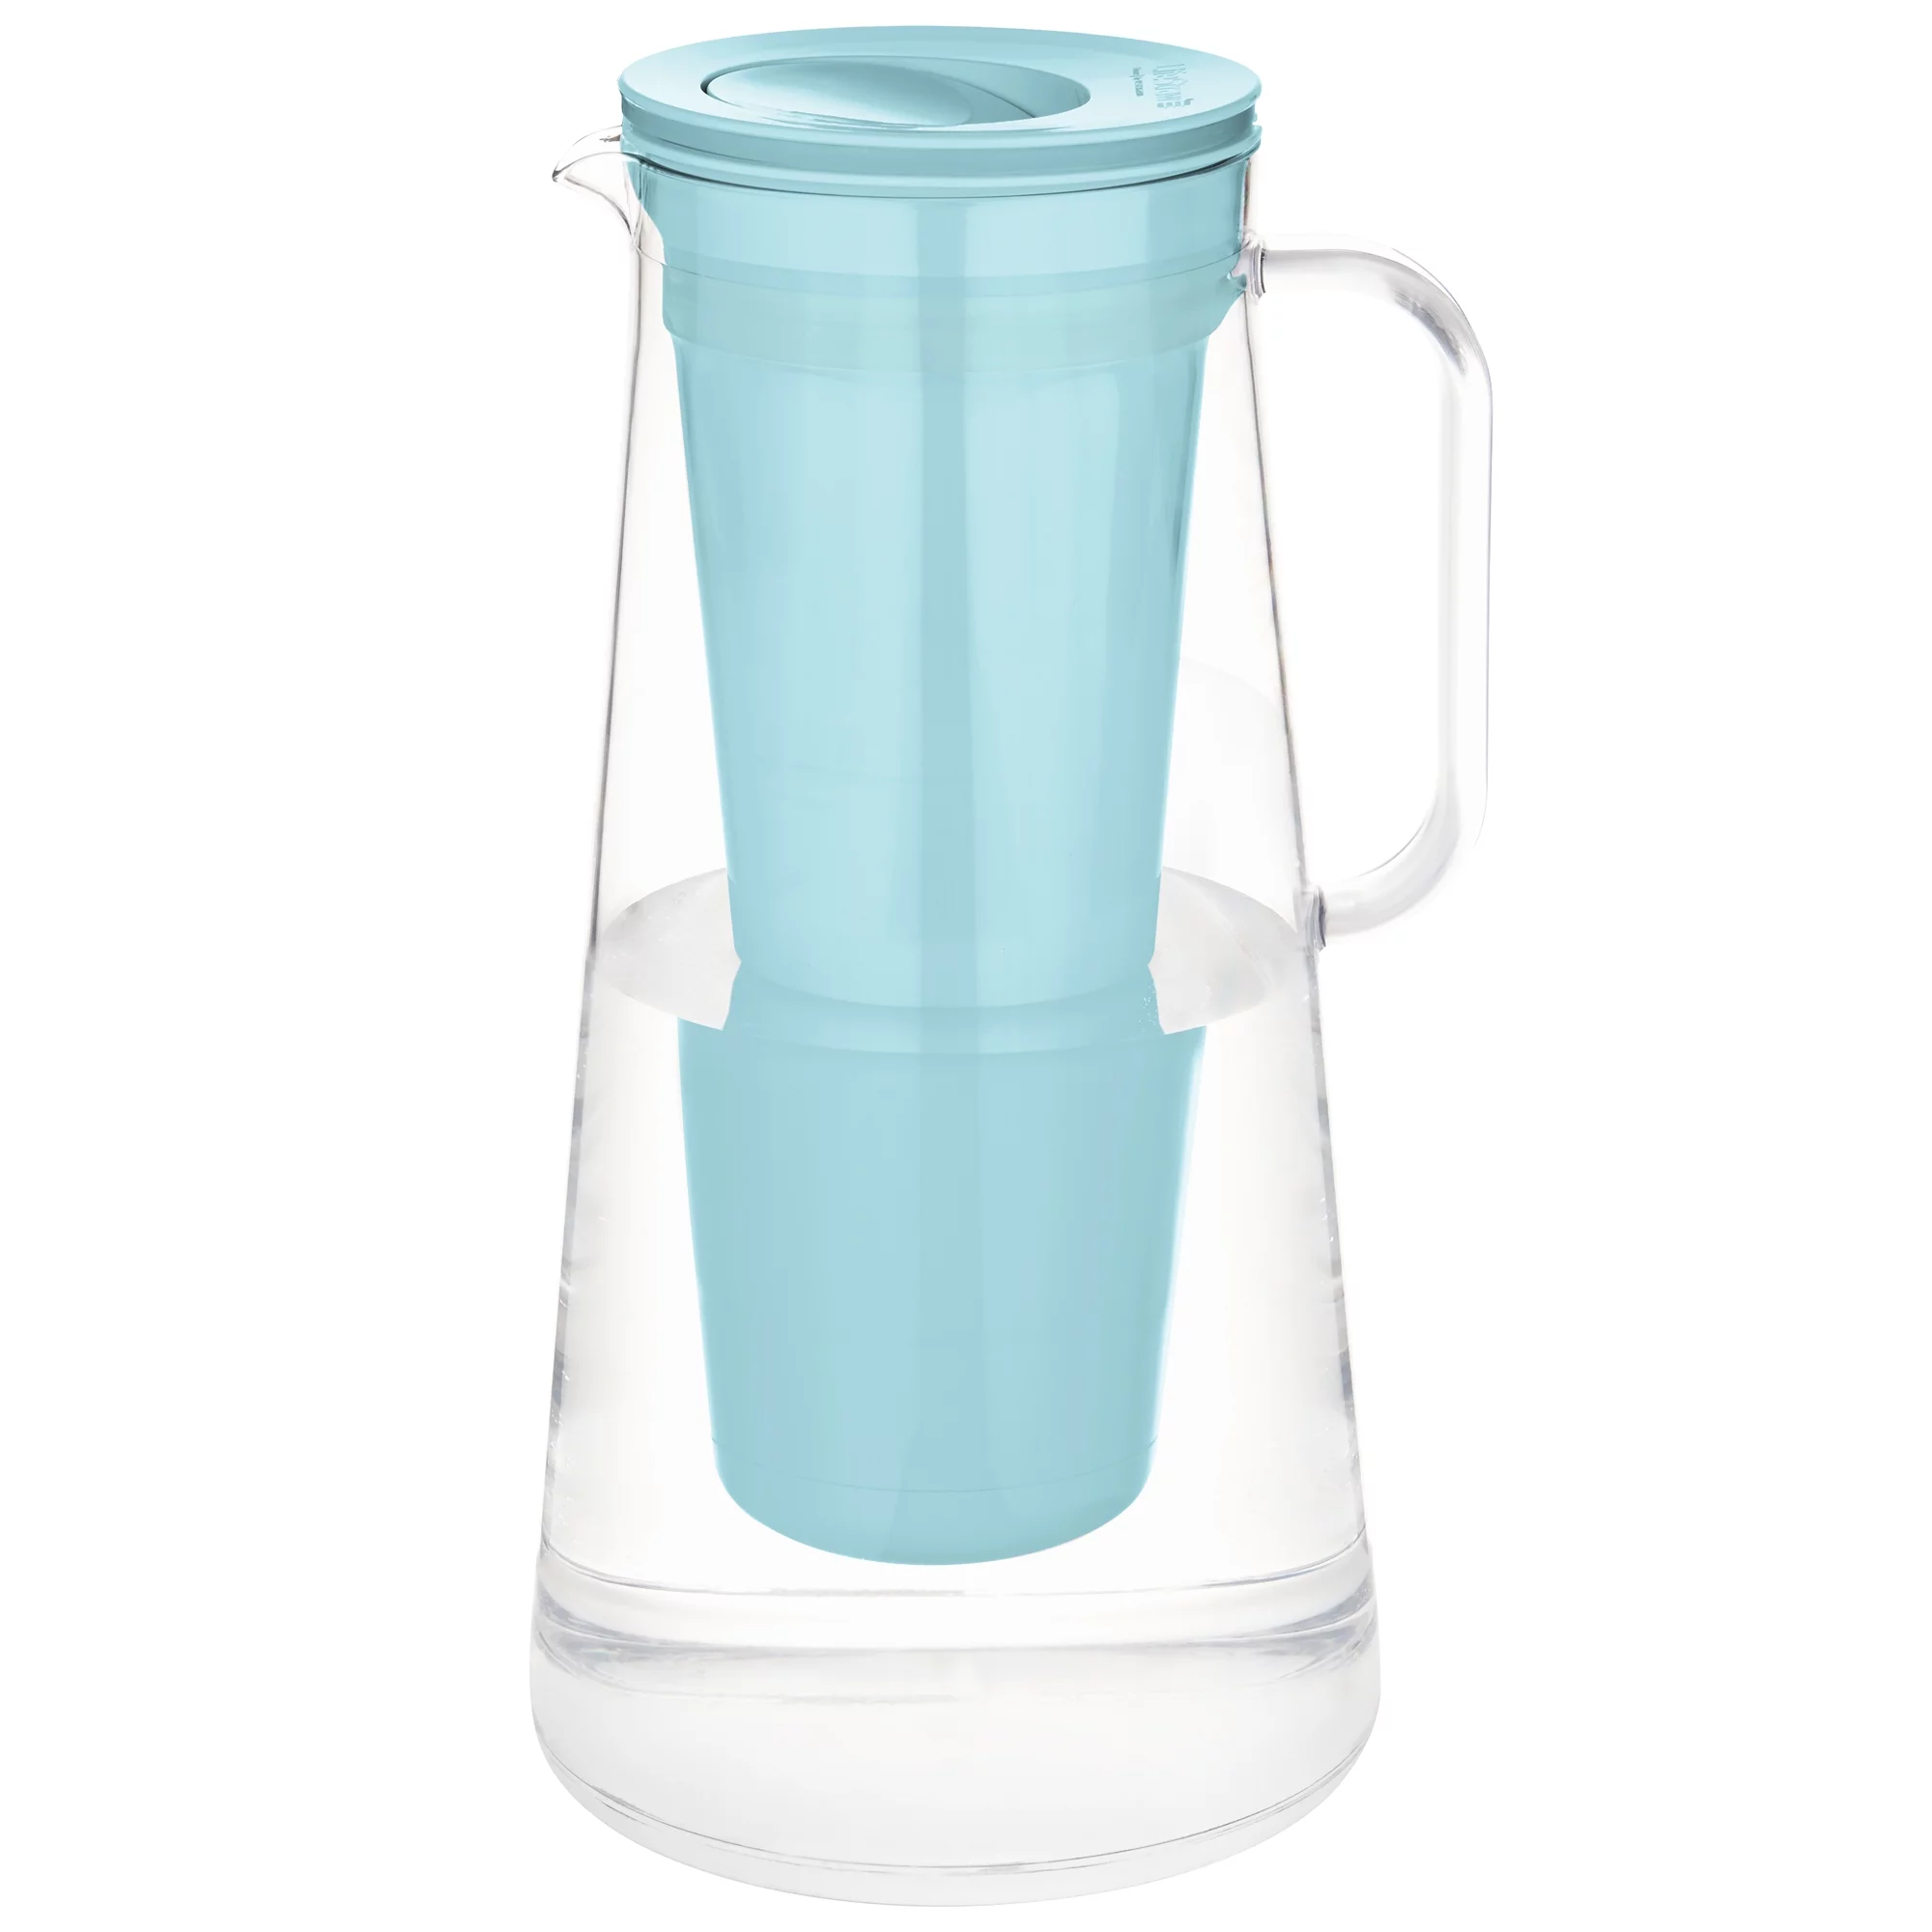 LifeStraw Home - Water Filter Pitcher 7-Cup